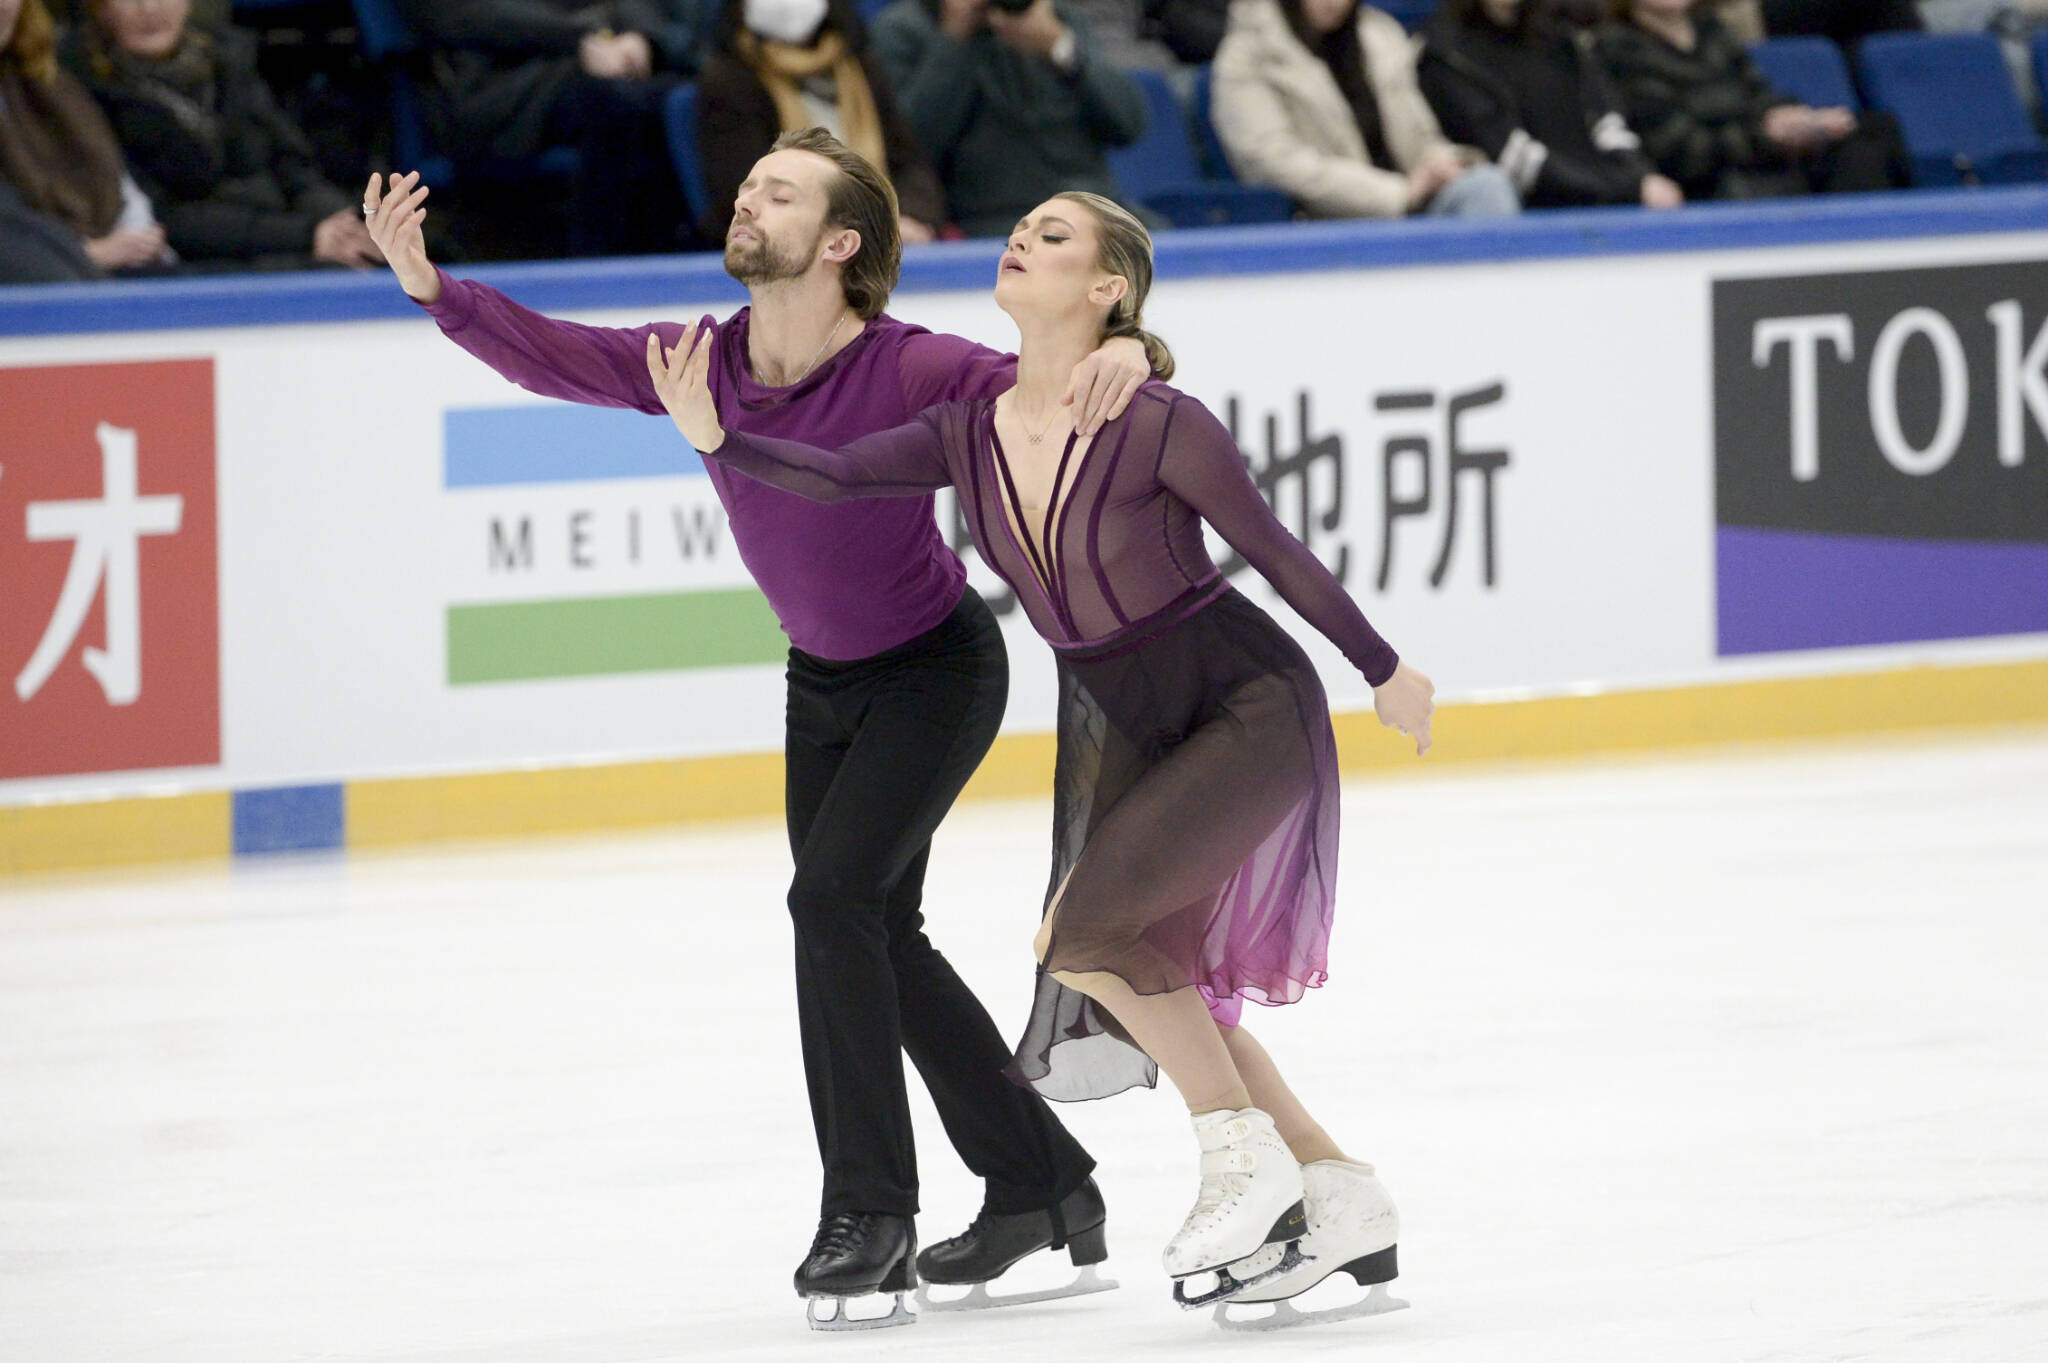 The United State’s Kaitlin Hawayek (right) and Jean-Luc Baker perform during the ice dance free dance at the ISU figure skating Grand Prix Espoo 2022 competition on Nov. 26 in Espoo, Finland. (Mikko Stig/Lehtikuva via AP)